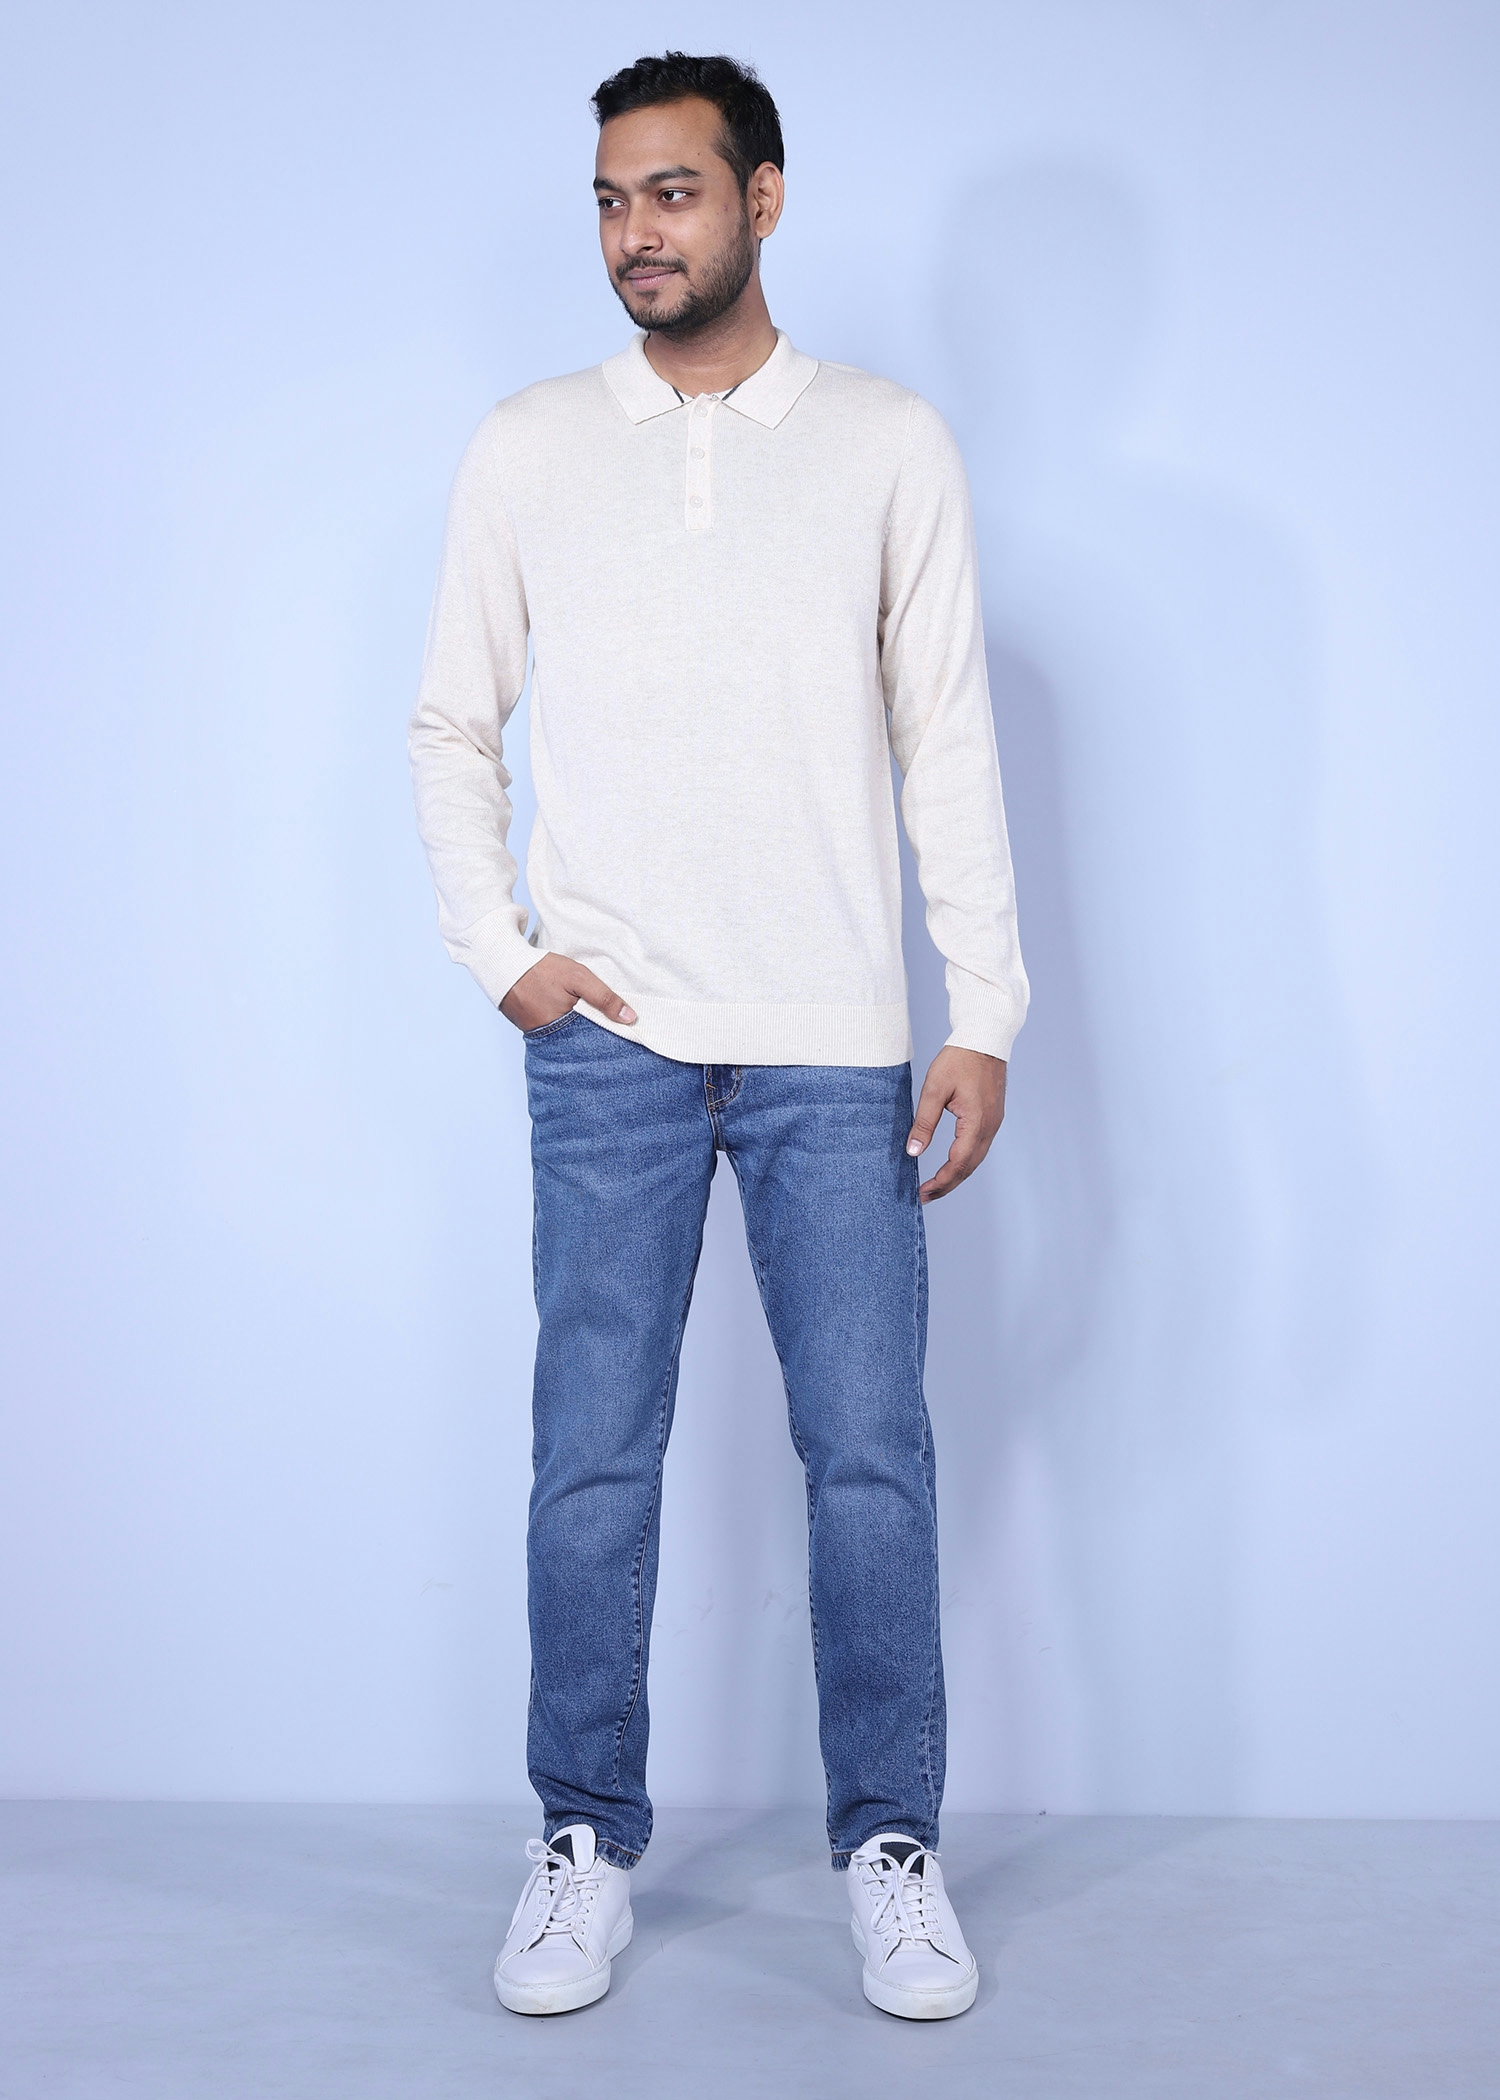 athens sweater ivory color full front view